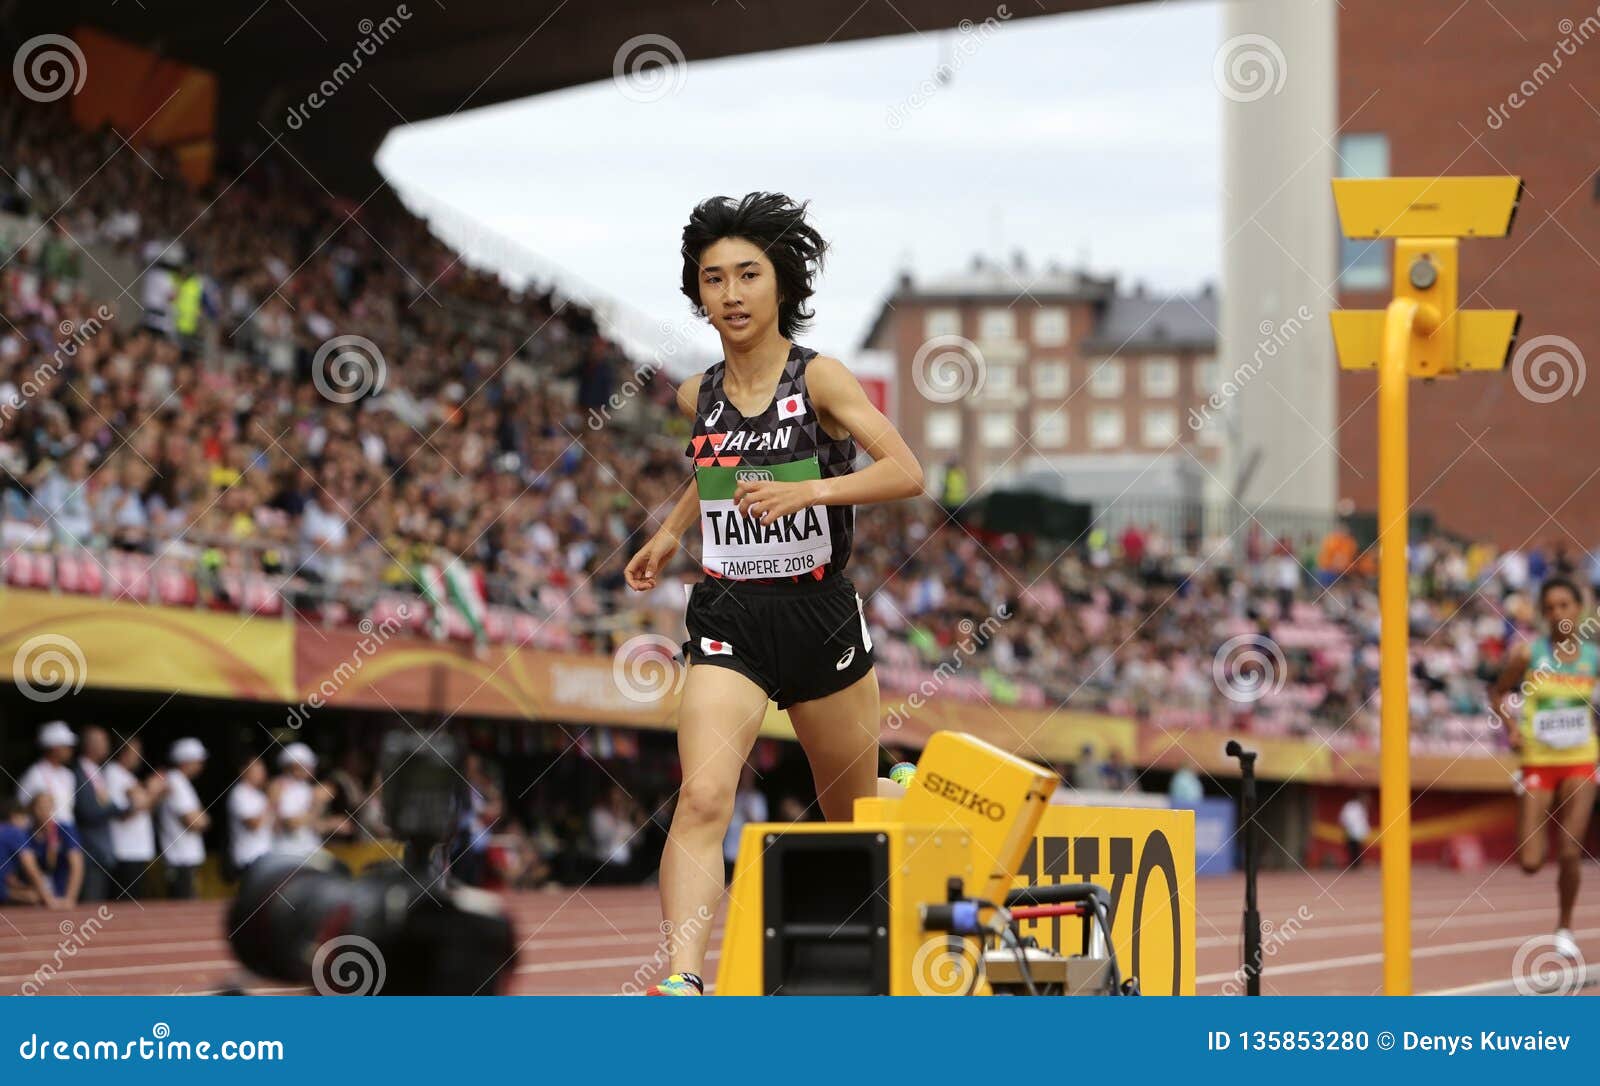 Nozomi Tanaka From Japan Win Gold In The 3000 Metres Final At The Iaaf World U Championships In Editorial Image Image Of Champions Championships